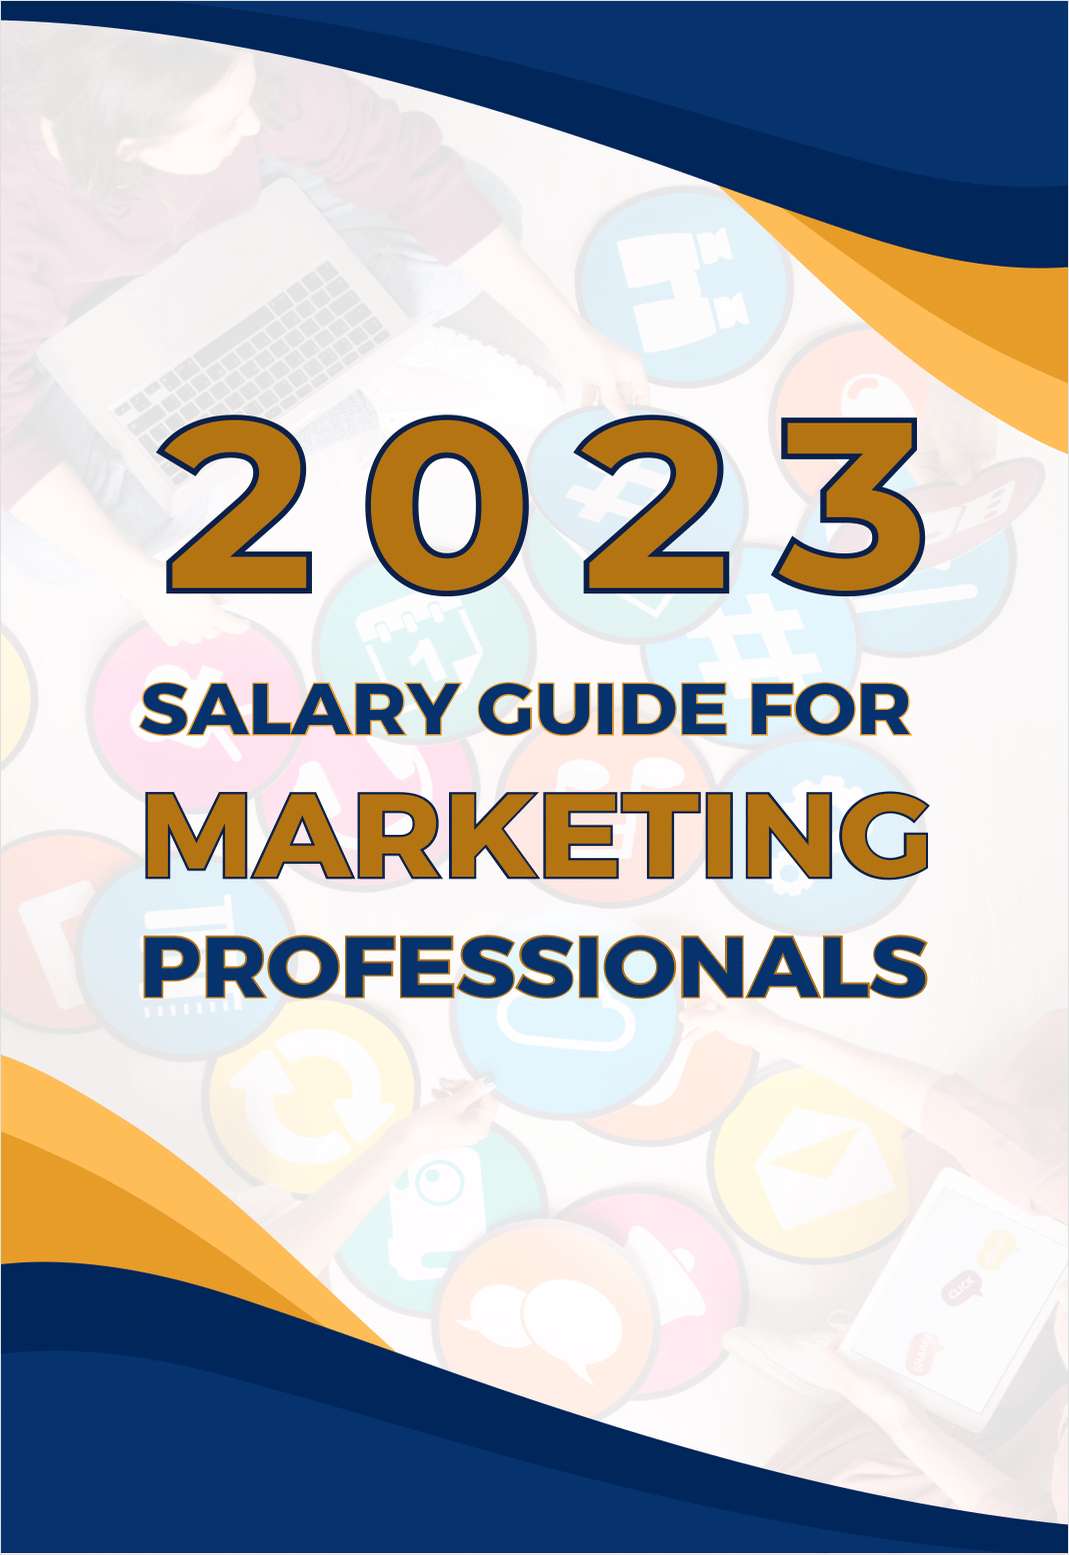 2023 Salary Guide for Marketing Professionals